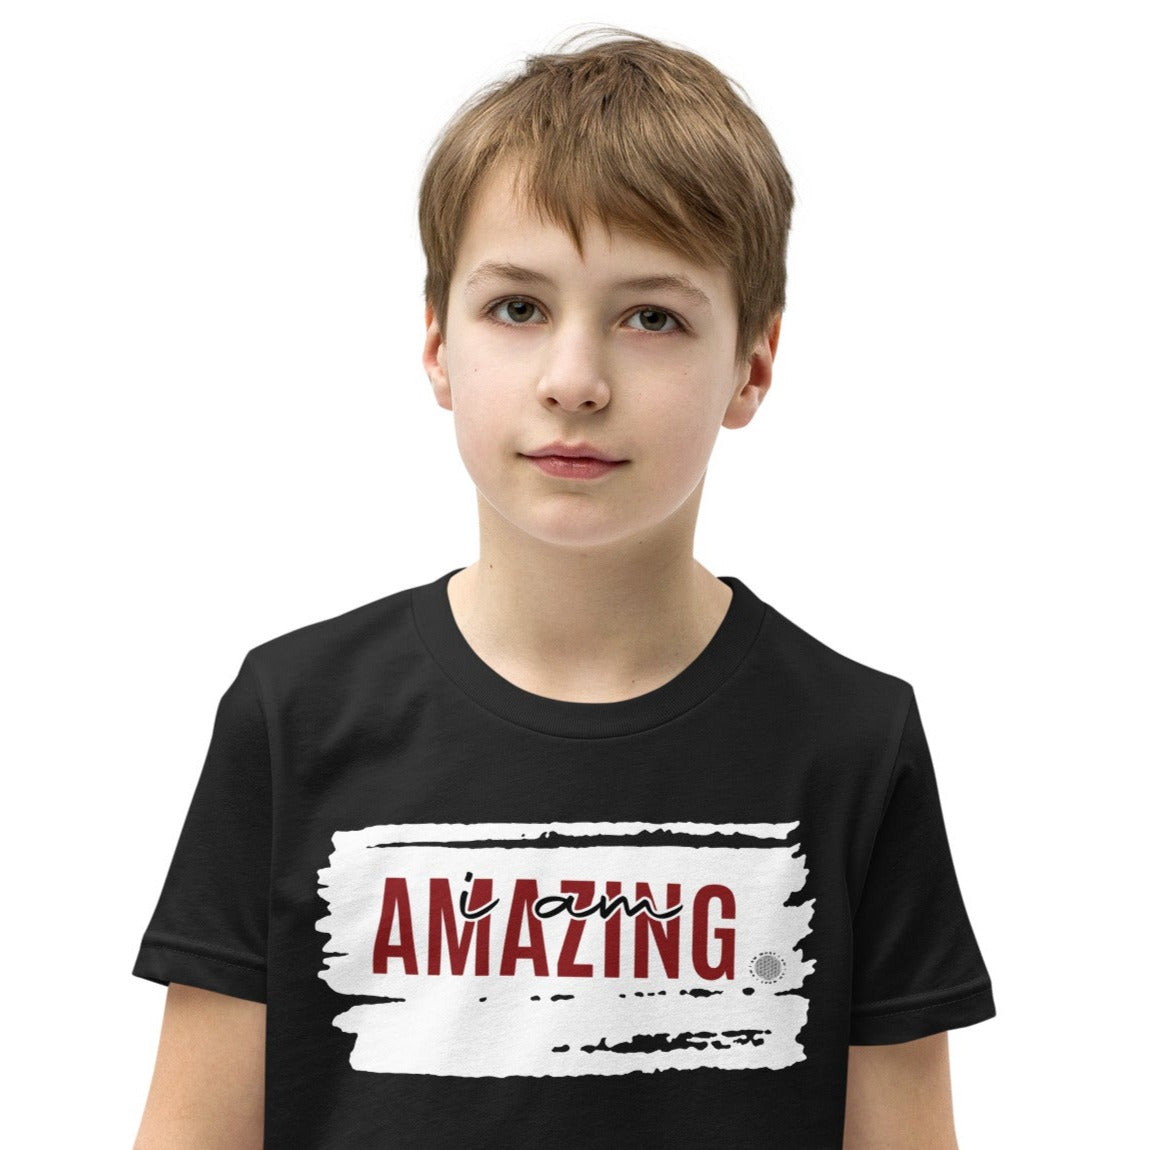 Our ‘I Am Amazing’ affirmation youth t-shirt is perfect for your son or daughter. Your child is sure to do some breathtaking feats.